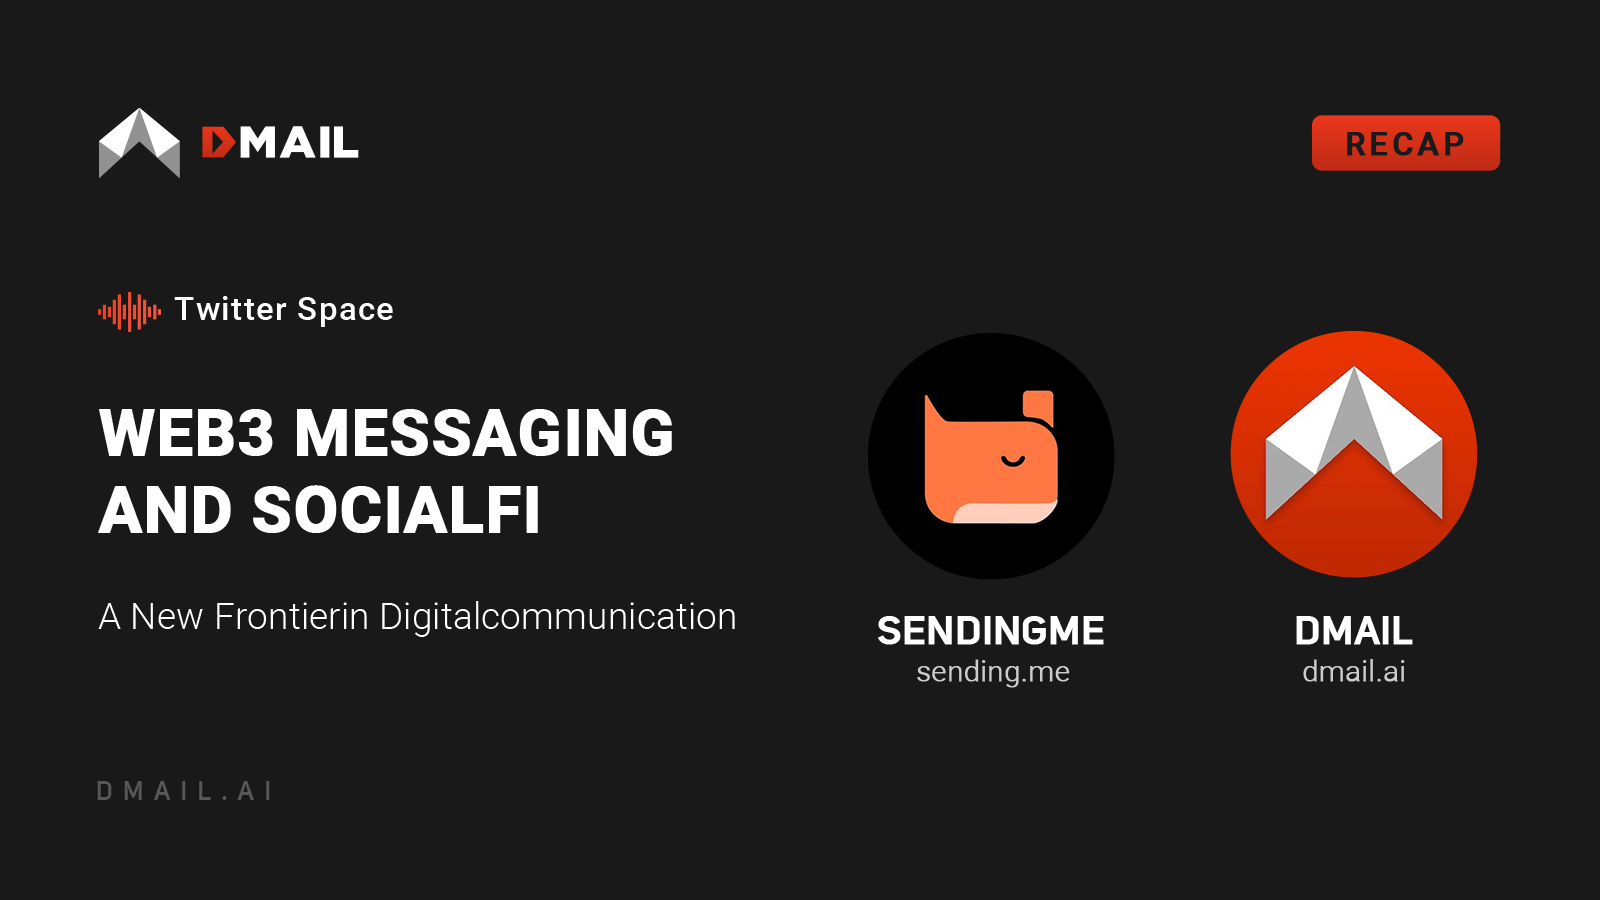 Web3 Messaging and SocialFi: A New Frontier in Digital Communication